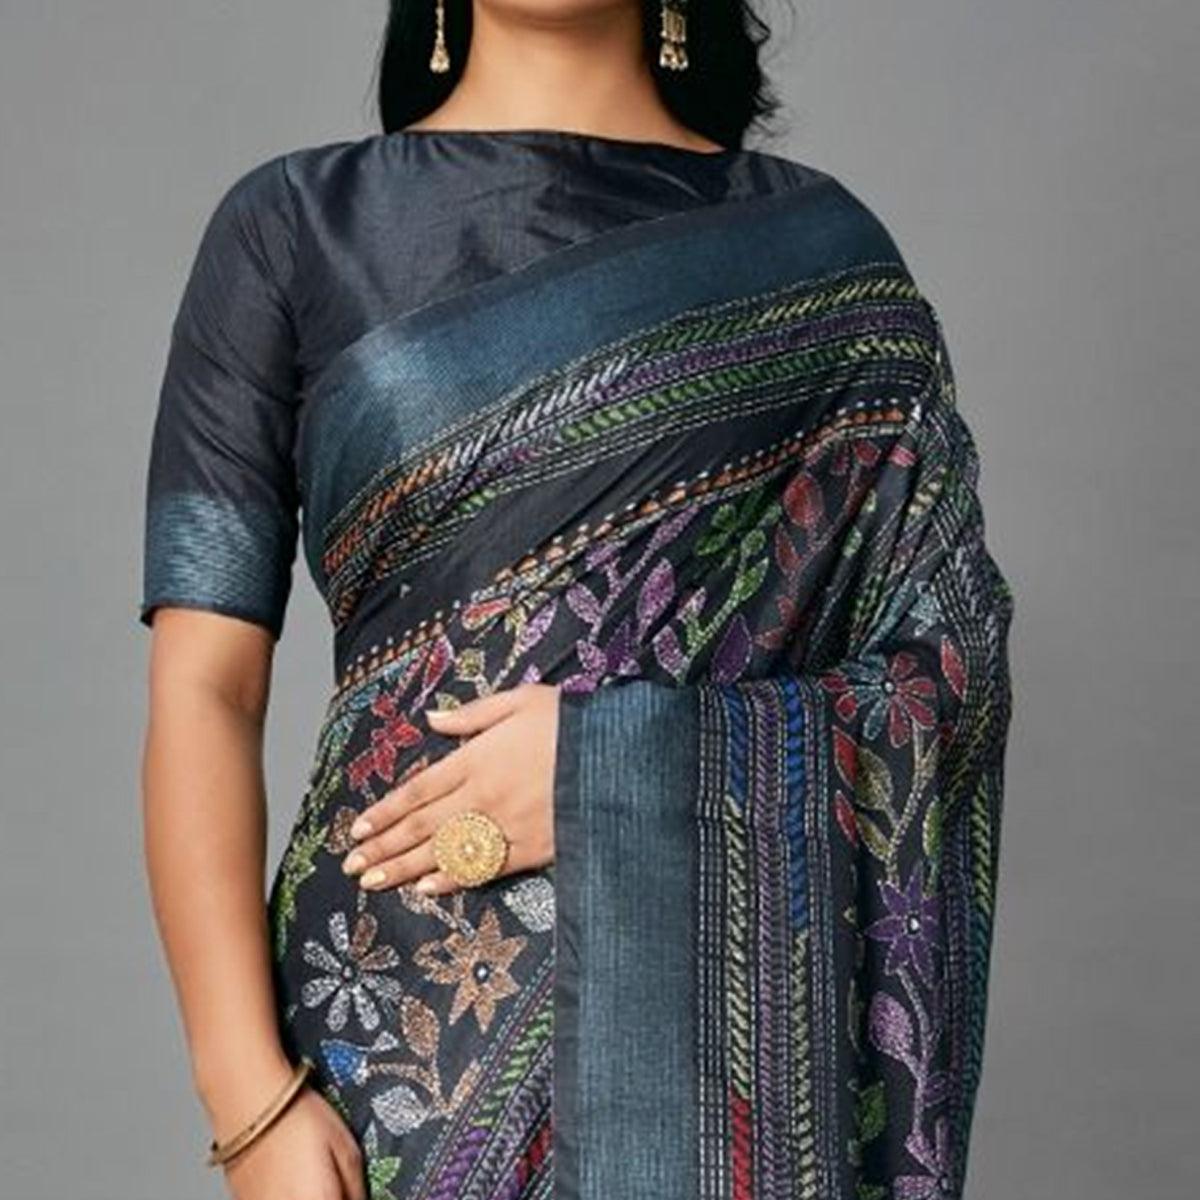 Black Casual Art Silk Printed Saree With Unstitched Blouse - Peachmode